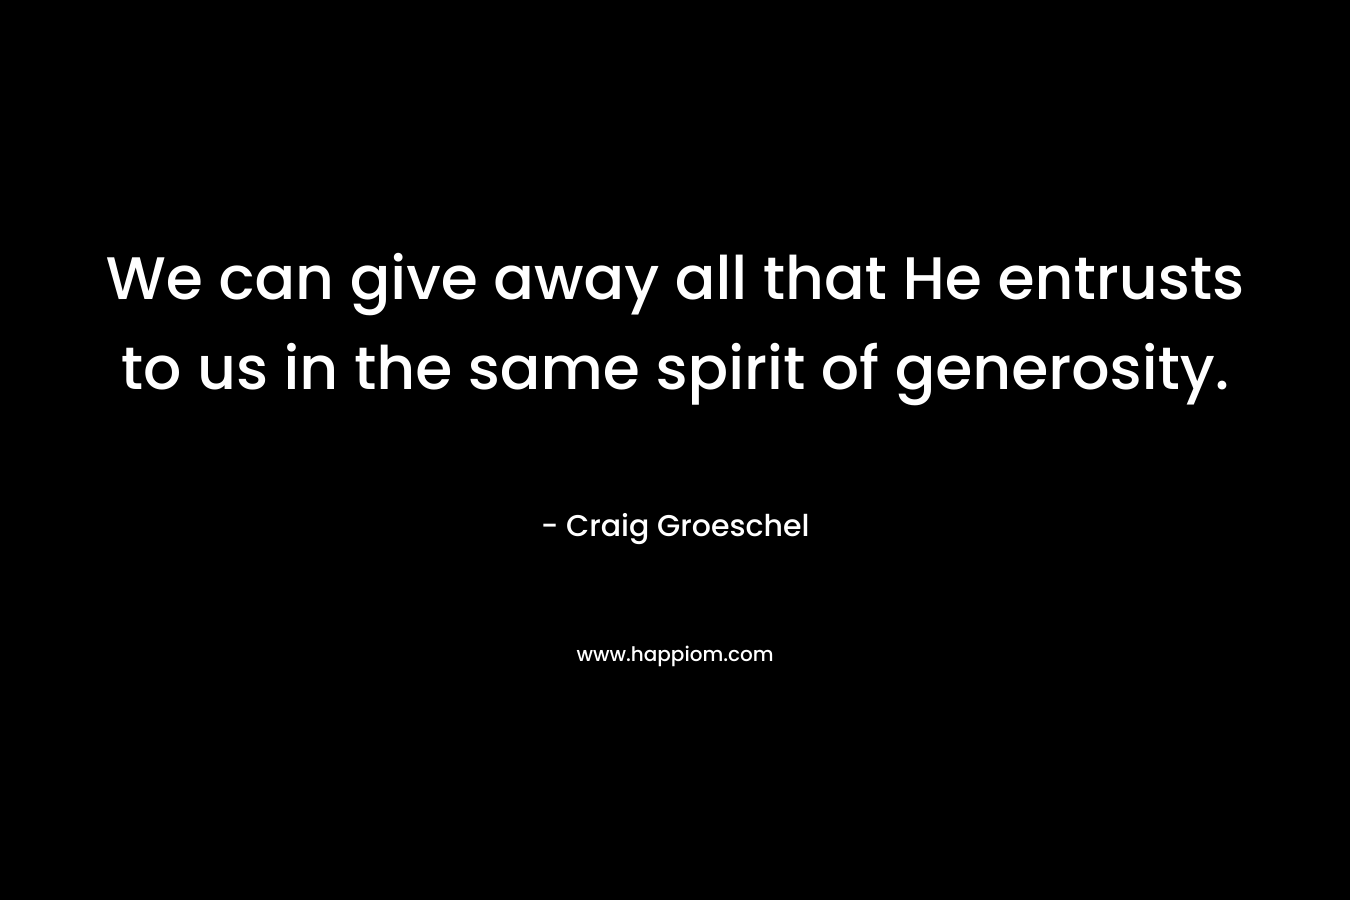 We can give away all that He entrusts to us in the same spirit of generosity.